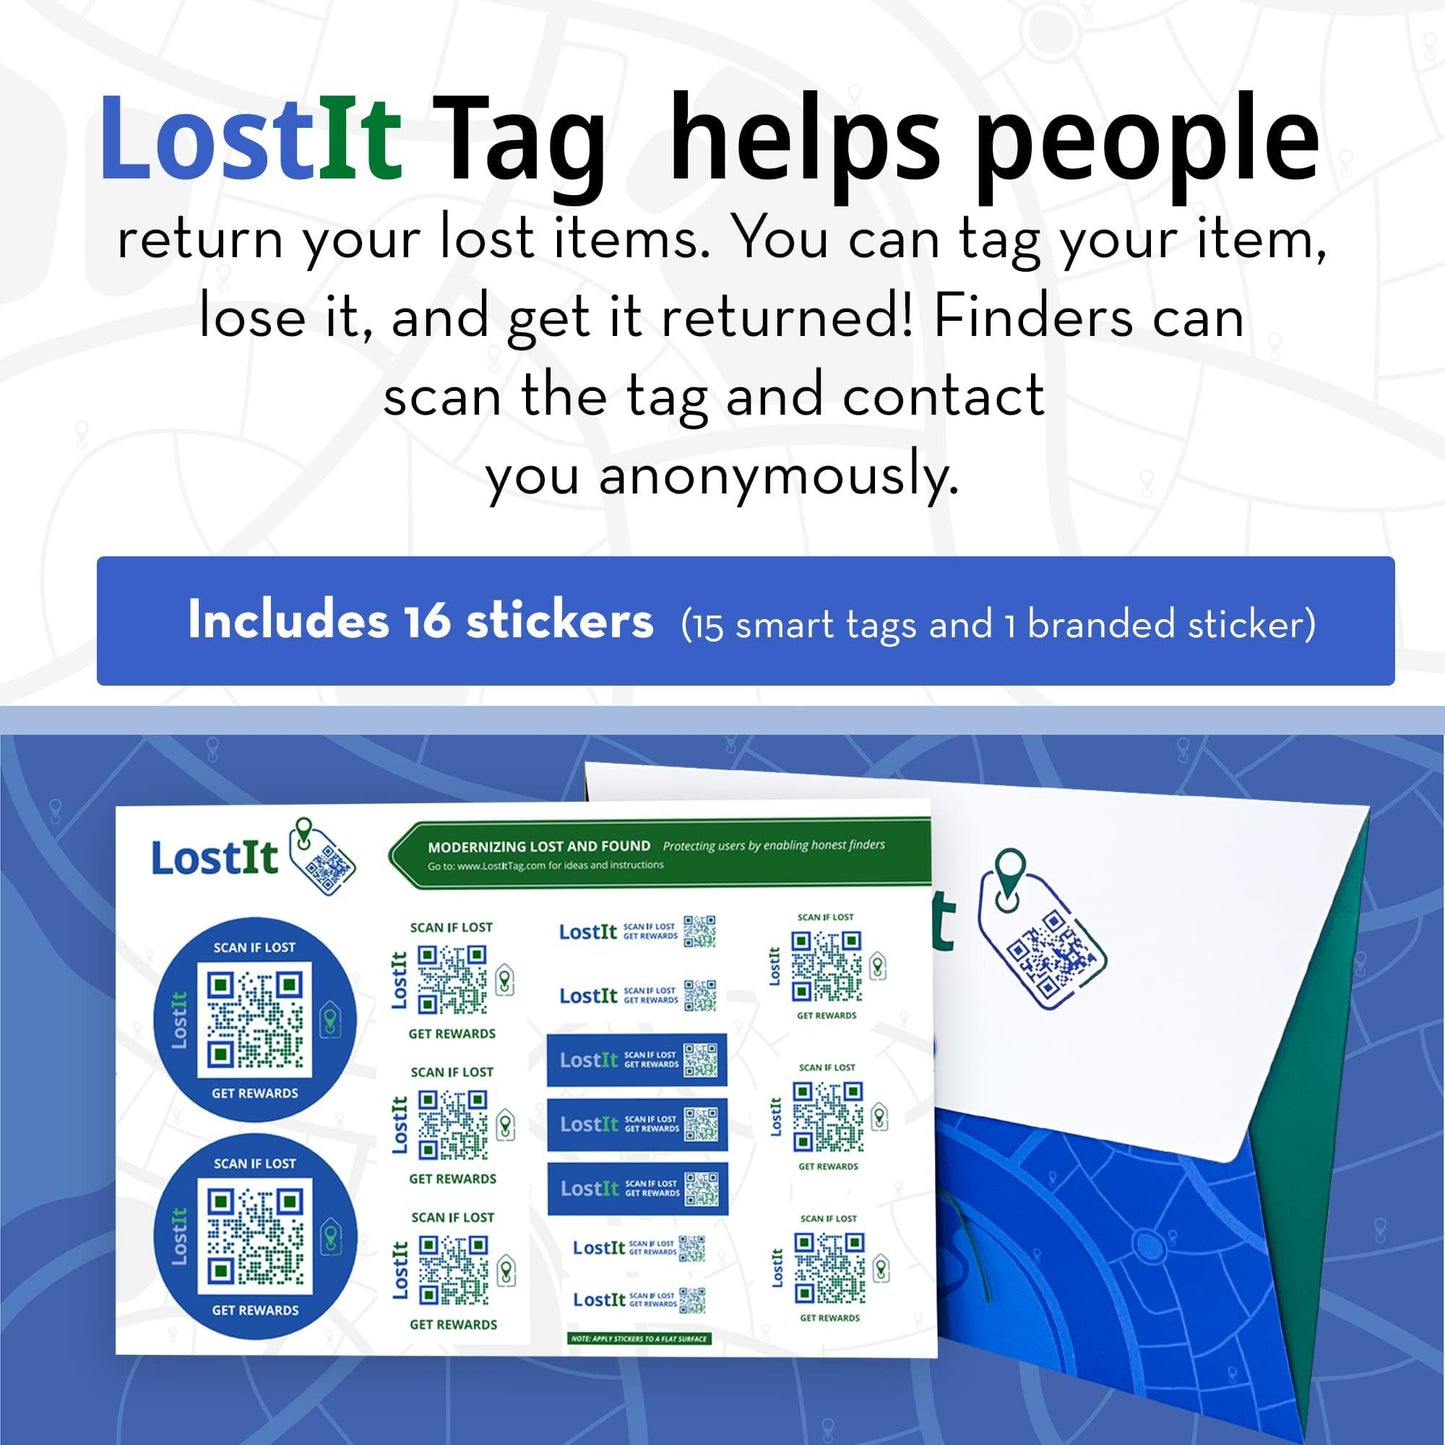 LostIt Tag helps people who find your lost items, to return your lost items to you. You can tag your item, lost it, and get it returned! Finders can scan the tag and contact you anonymously. Finders do not need the app in order to scan your item. Each sticker page includes 16 stickers.